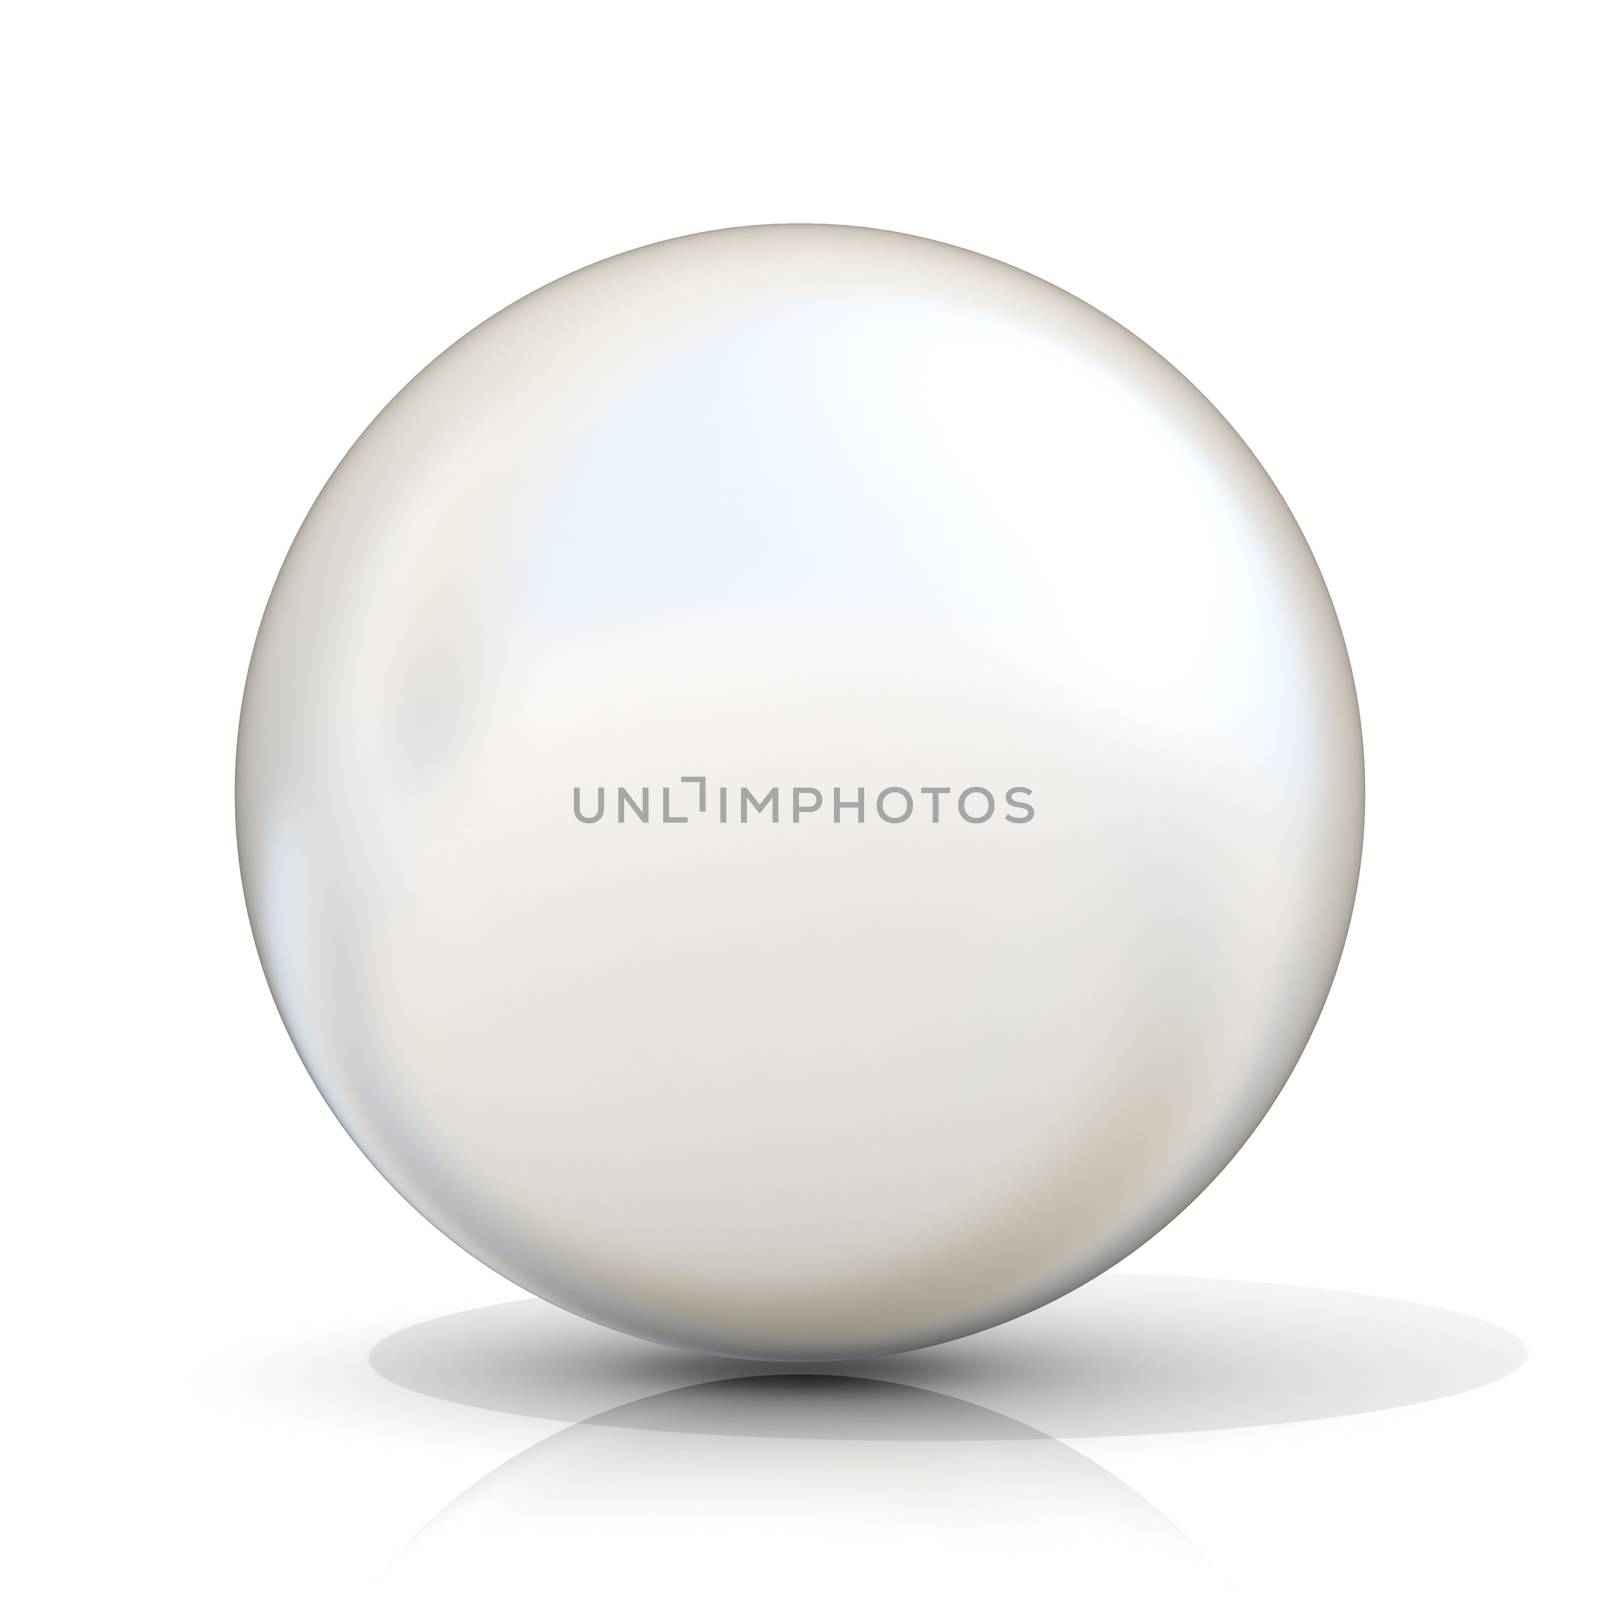 3D white sphere isolated on white background